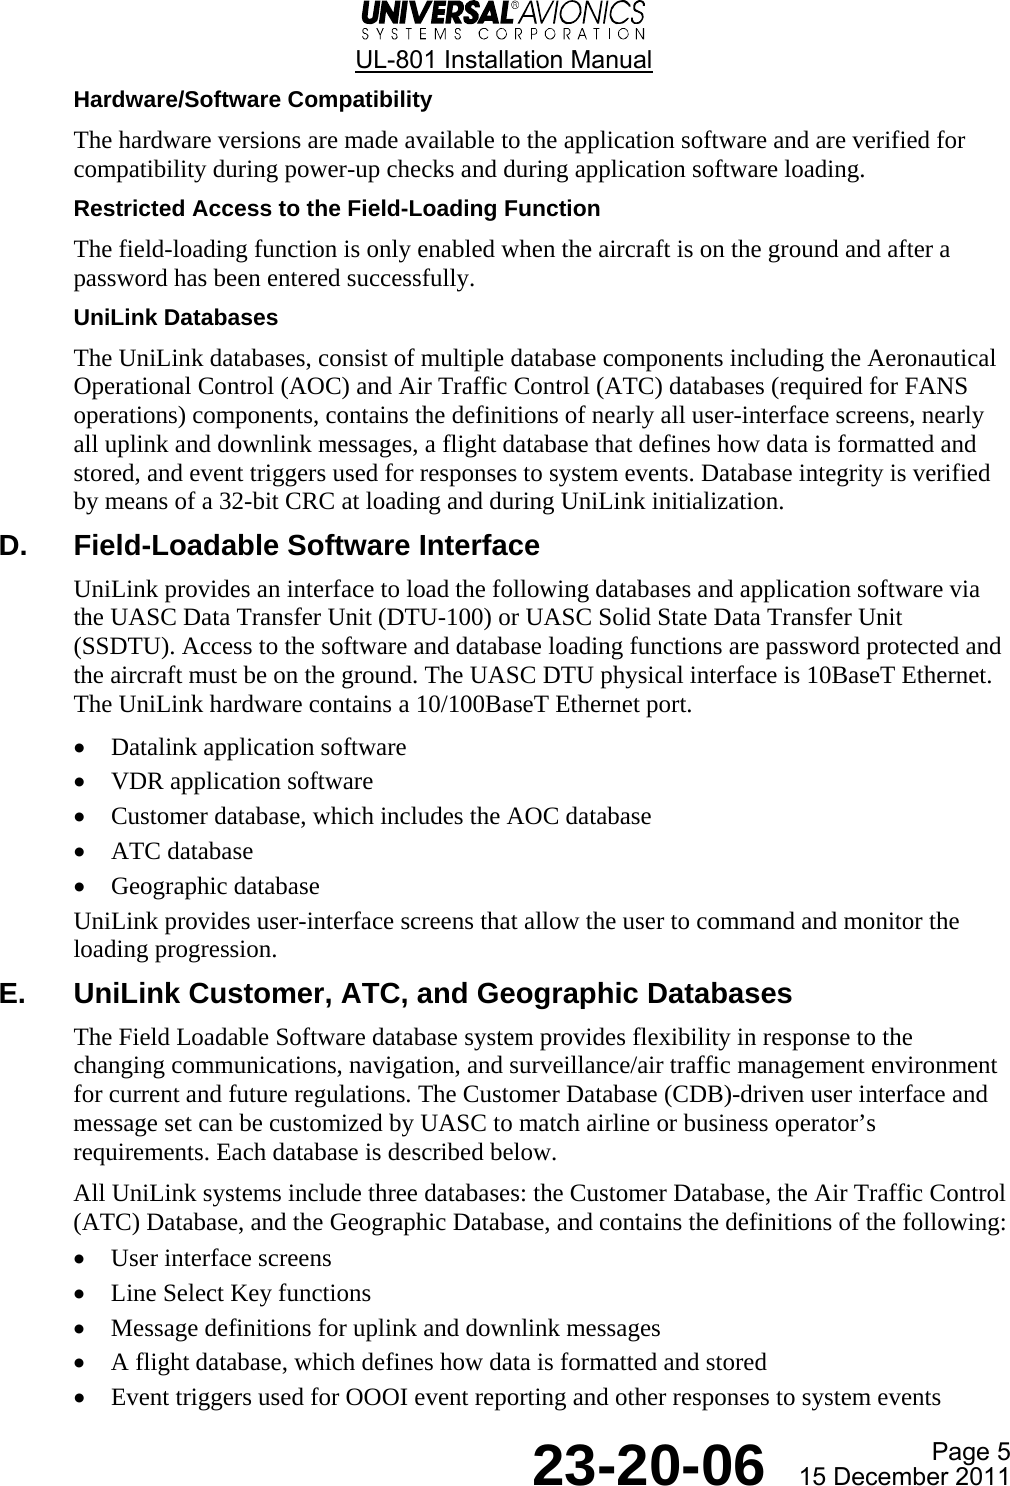  UL-801 Installation Manual  Page 5  23-20-06  15 December 2011 Hardware/Software Compatibility The hardware versions are made available to the application software and are verified for compatibility during power-up checks and during application software loading. Restricted Access to the Field-Loading Function The field-loading function is only enabled when the aircraft is on the ground and after a password has been entered successfully. UniLink Databases The UniLink databases, consist of multiple database components including the Aeronautical Operational Control (AOC) and Air Traffic Control (ATC) databases (required for FANS operations) components, contains the definitions of nearly all user-interface screens, nearly all uplink and downlink messages, a flight database that defines how data is formatted and stored, and event triggers used for responses to system events. Database integrity is verified by means of a 32-bit CRC at loading and during UniLink initialization. D.  Field-Loadable Software Interface UniLink provides an interface to load the following databases and application software via the UASC Data Transfer Unit (DTU-100) or UASC Solid State Data Transfer Unit (SSDTU). Access to the software and database loading functions are password protected and the aircraft must be on the ground. The UASC DTU physical interface is 10BaseT Ethernet. The UniLink hardware contains a 10/100BaseT Ethernet port. • Datalink application software • VDR application software • Customer database, which includes the AOC database • ATC database • Geographic database UniLink provides user-interface screens that allow the user to command and monitor the loading progression. E.  UniLink Customer, ATC, and Geographic Databases The Field Loadable Software database system provides flexibility in response to the changing communications, navigation, and surveillance/air traffic management environment for current and future regulations. The Customer Database (CDB)-driven user interface and message set can be customized by UASC to match airline or business operator’s requirements. Each database is described below. All UniLink systems include three databases: the Customer Database, the Air Traffic Control (ATC) Database, and the Geographic Database, and contains the definitions of the following: • User interface screens • Line Select Key functions • Message definitions for uplink and downlink messages • A flight database, which defines how data is formatted and stored • Event triggers used for OOOI event reporting and other responses to system events   